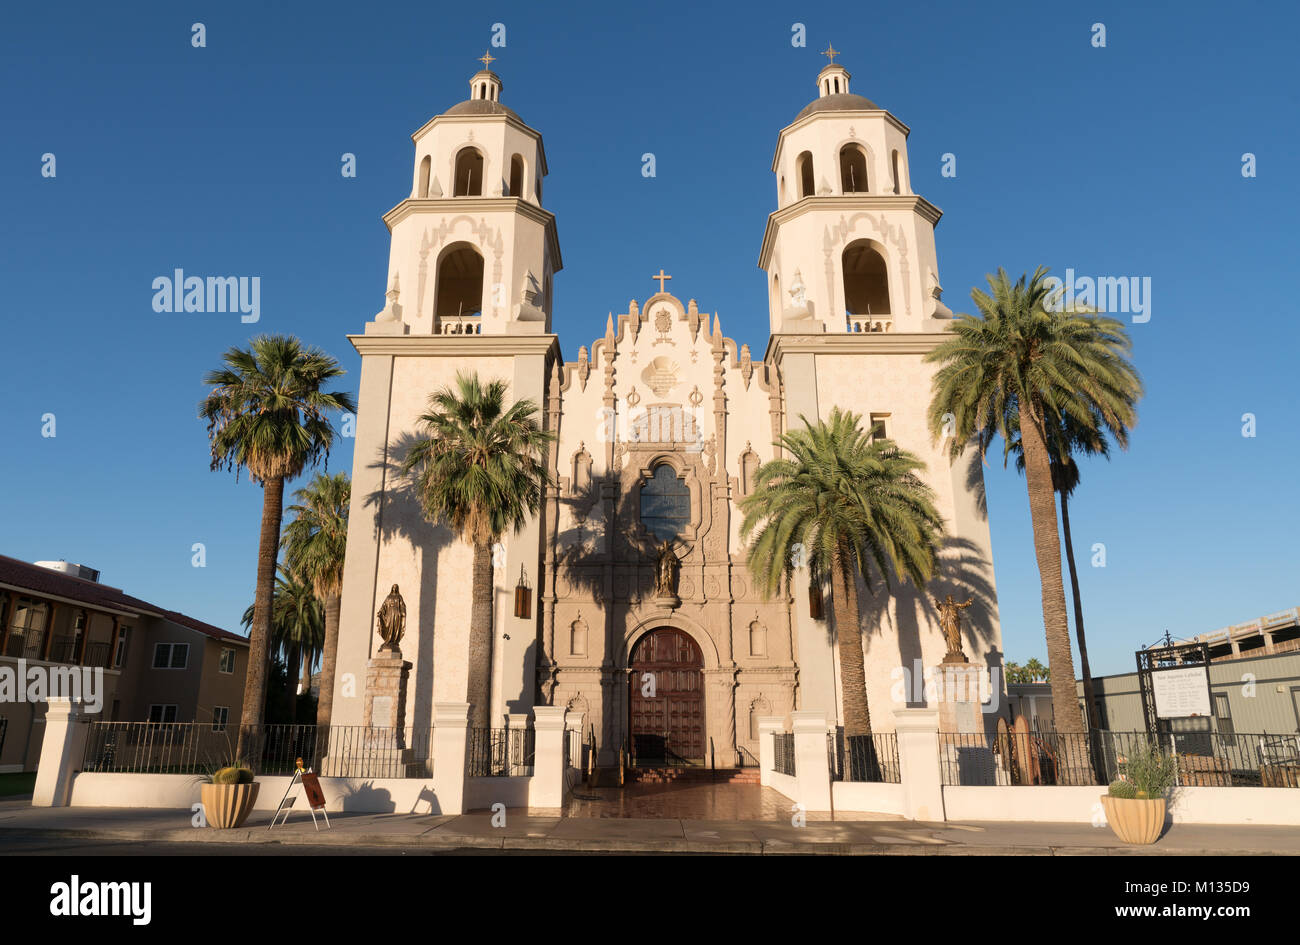 TUCSON, AZ - OCTOBER 26, 2017: Beautiful exterior of the historic St Augustine Cathedral in Tucson, Arizona Stock Photo